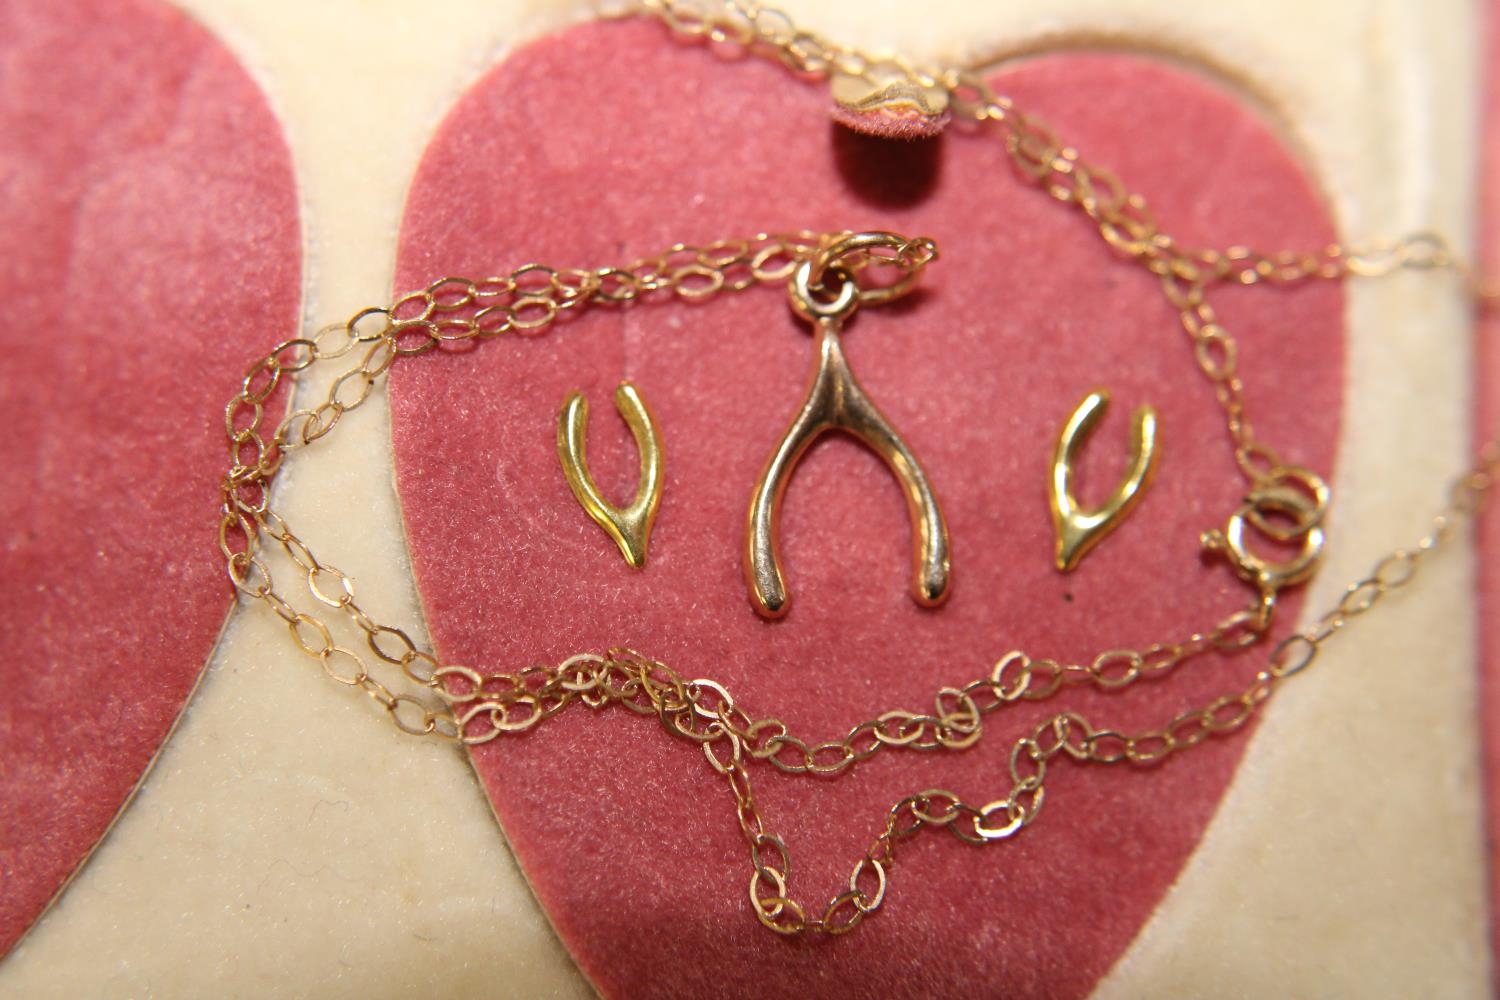 A boxed set of 9ct gold earrings & necklace with wishbone pendant